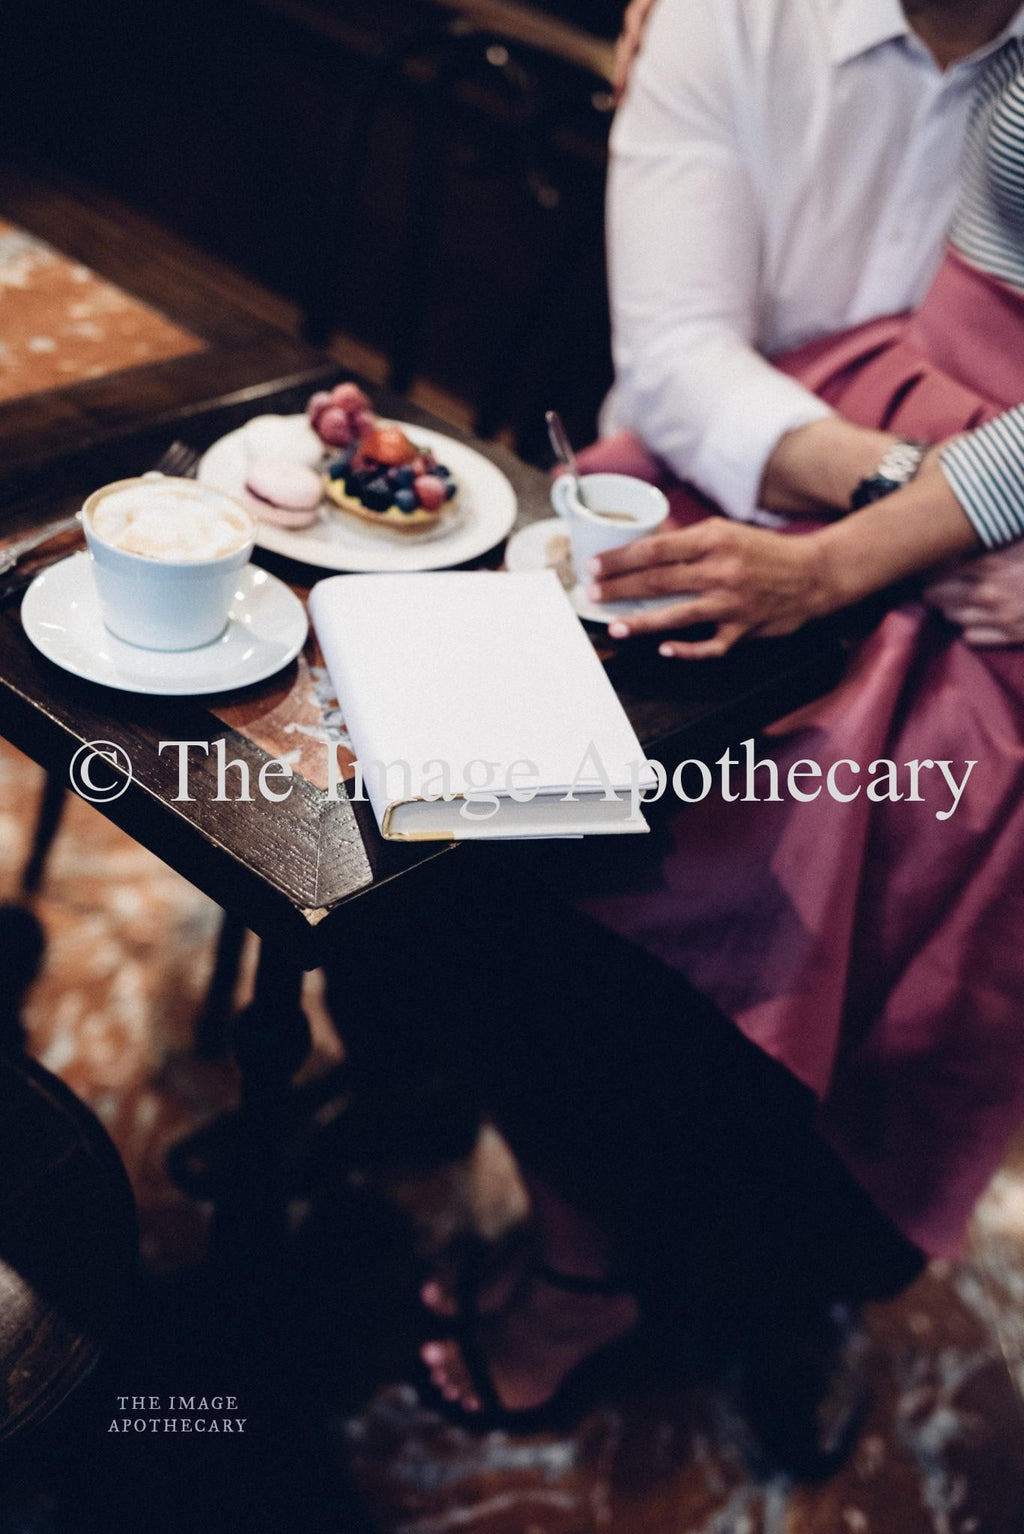 TheImageApothecary-320M - Stock Photography by The Image Apothecary